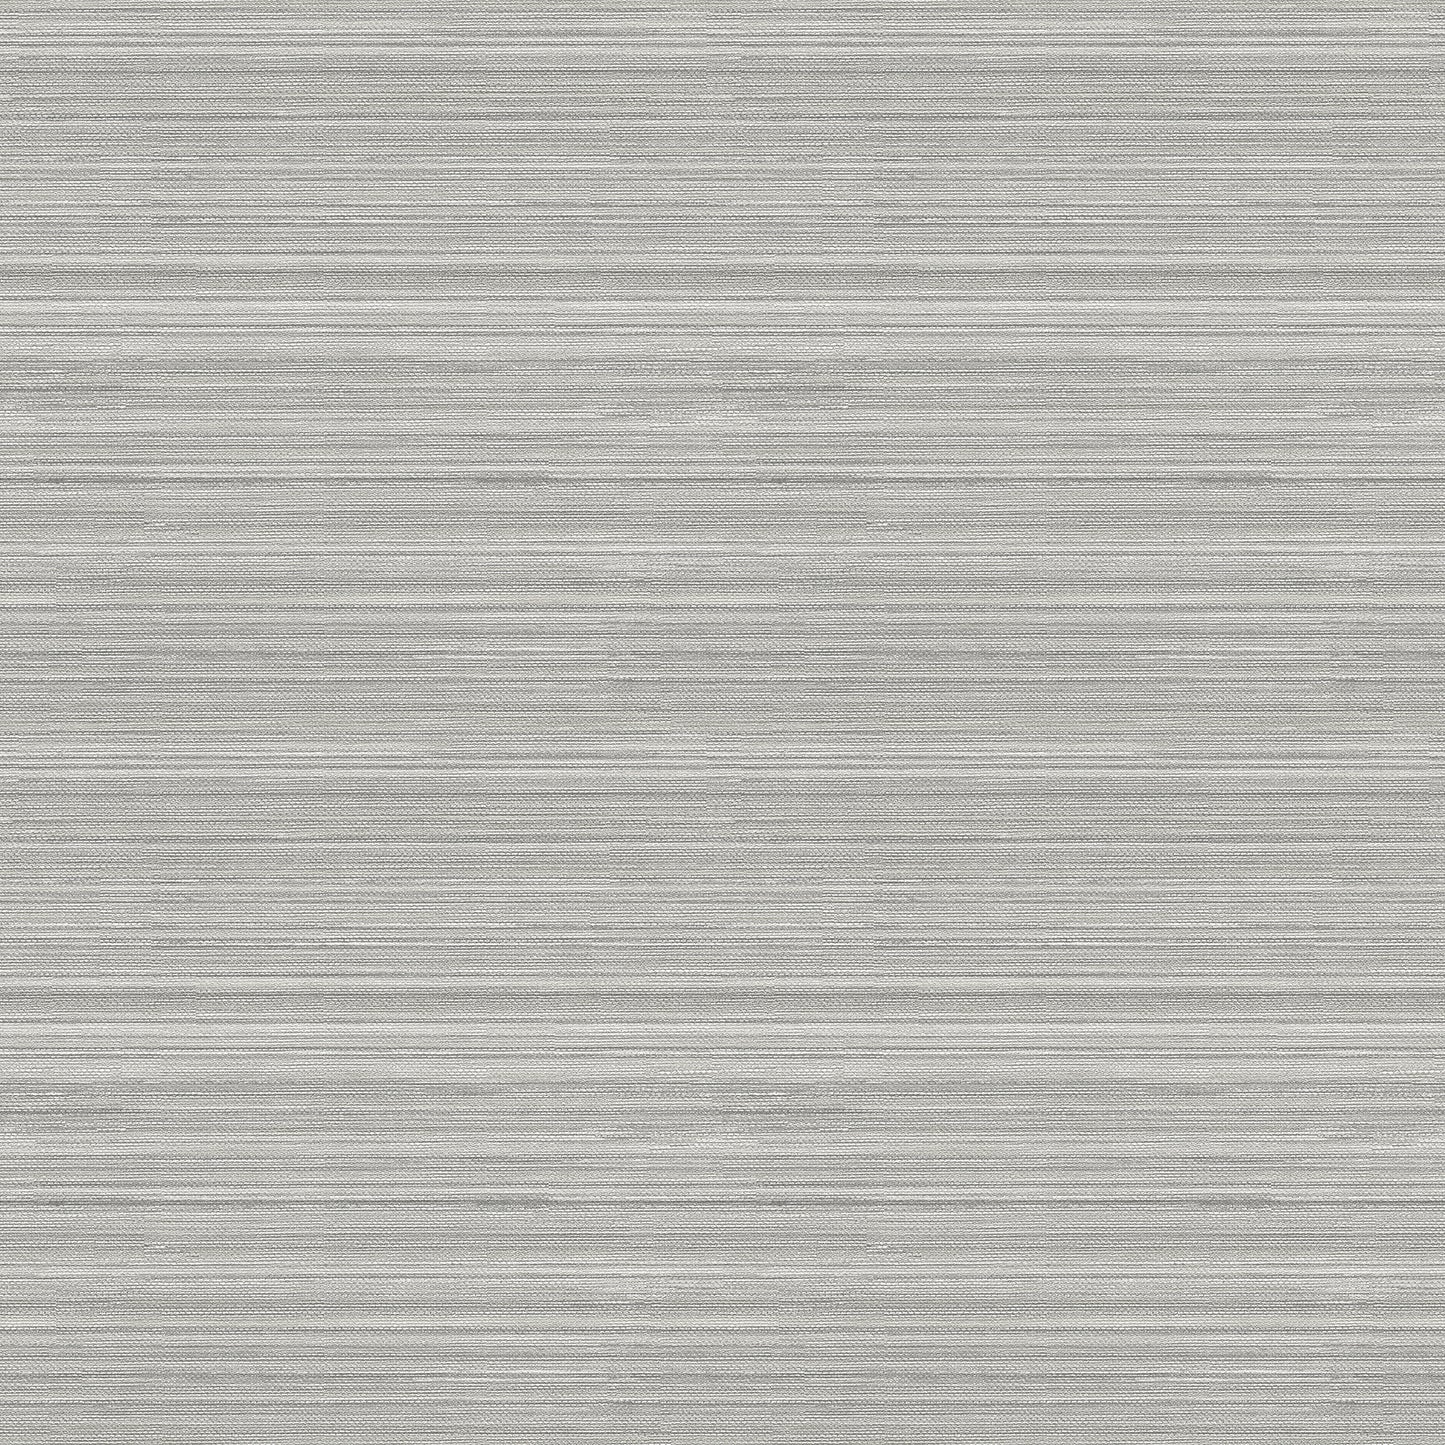 Looking for 2971-86348 Dimensions Skyler Grey Striped Grey A-Street Prints Wallpaper